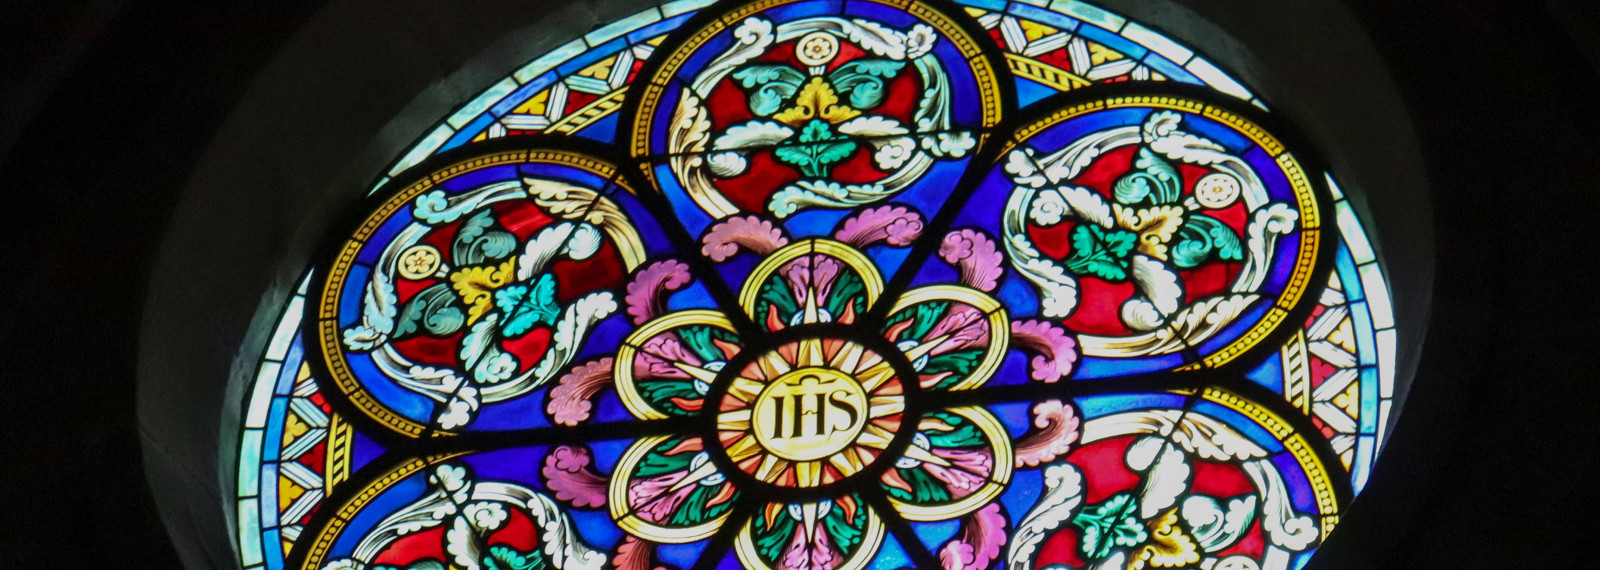 Image of a circular stained glass window